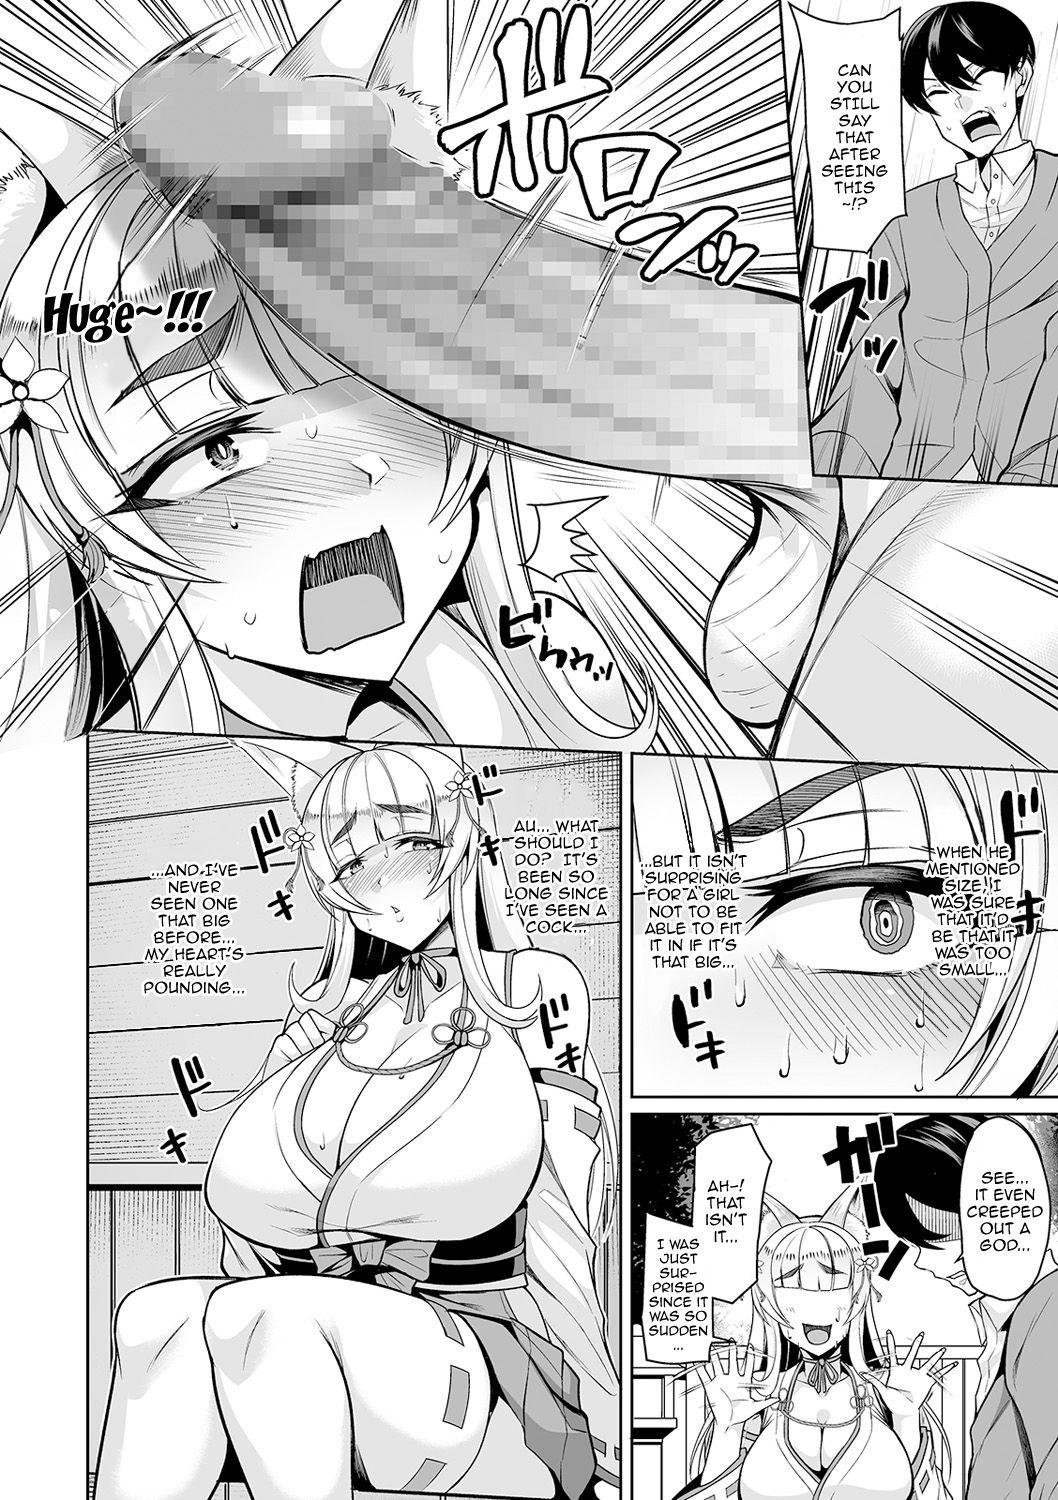 Exhibitionist Cos Miko Zuma to Yami Otoko | The Cosplaying Shrine Maiden And The Suffering Man Blonde - Page 4